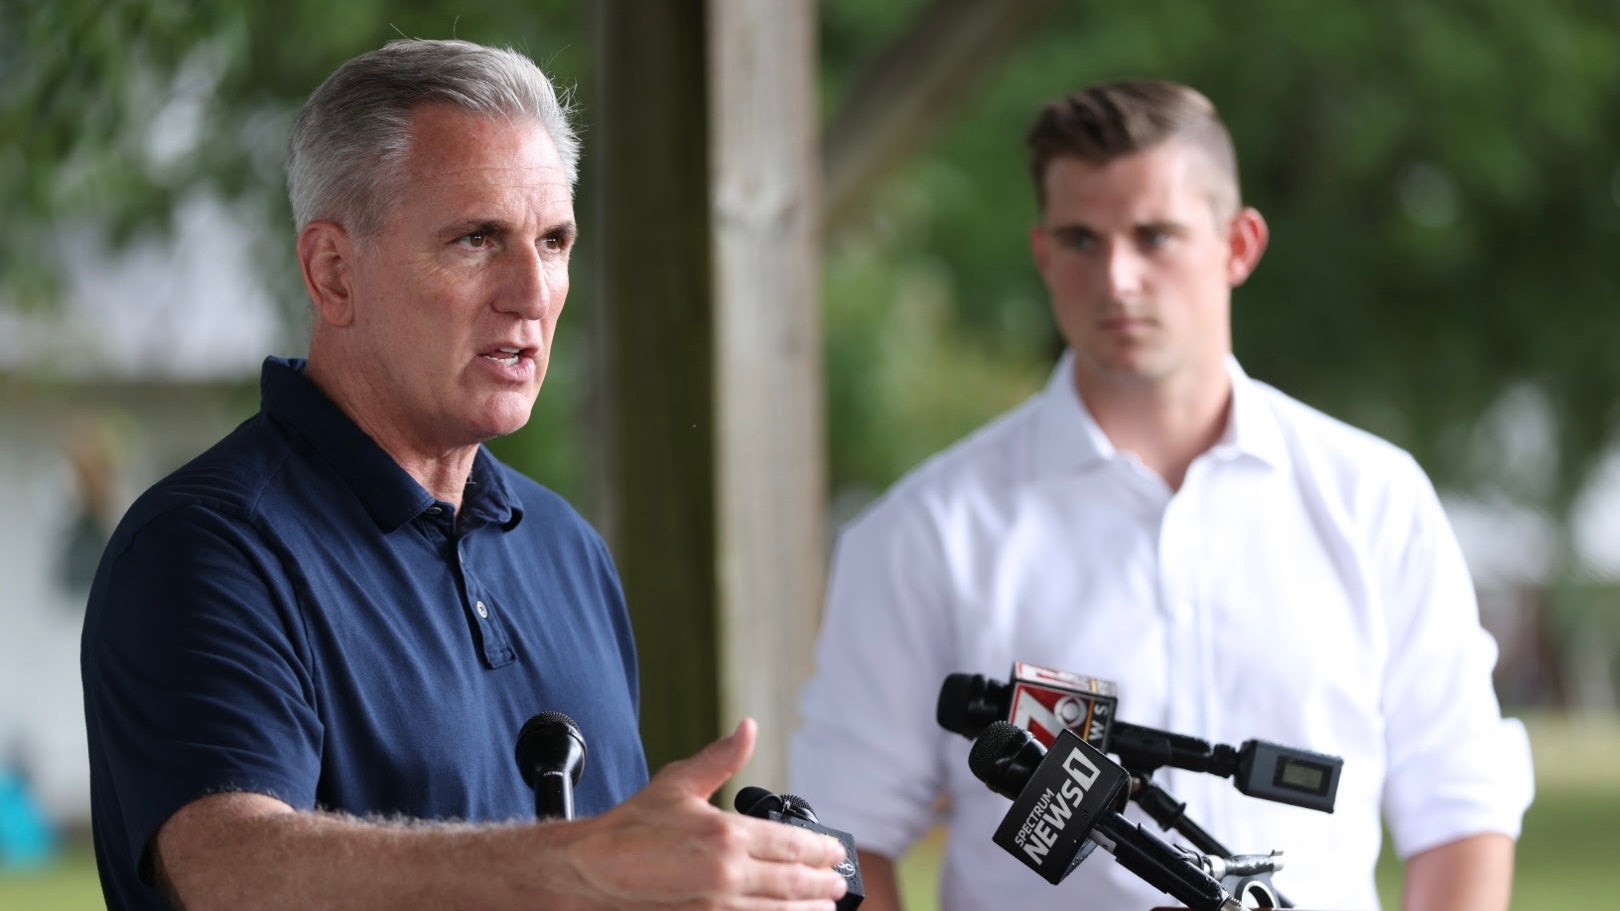 House GOP leader McCarthy showcases summer vacation spent boosting GOP candidates in push to win back majority